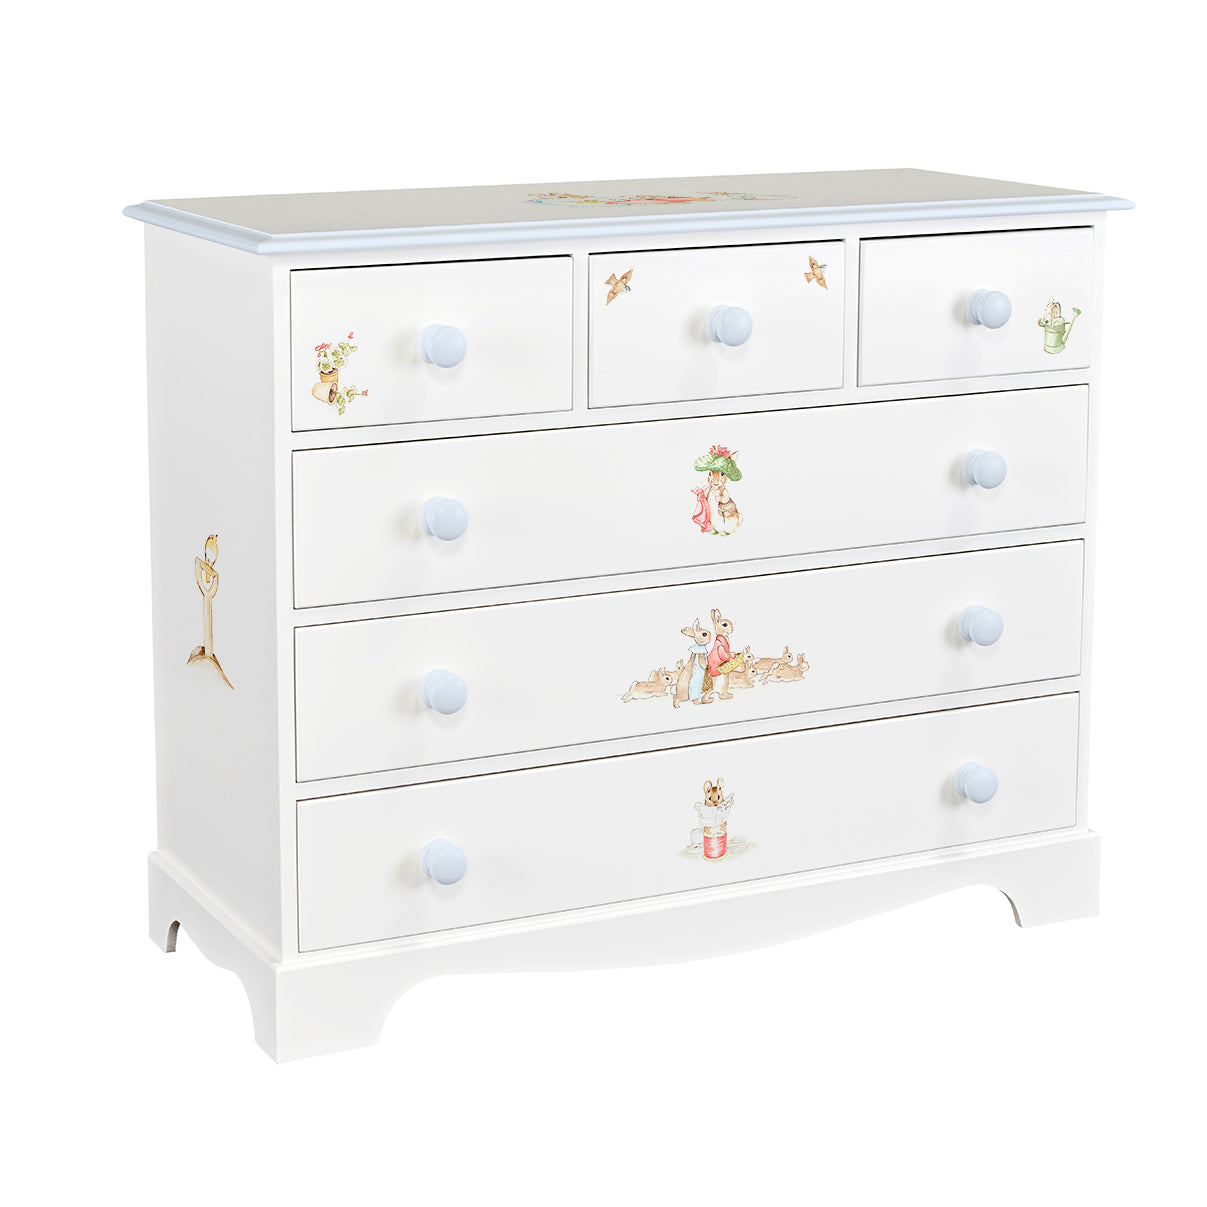 Extra Large Chest of Drawers - Beatrix Potter with Blissful Blue Trim